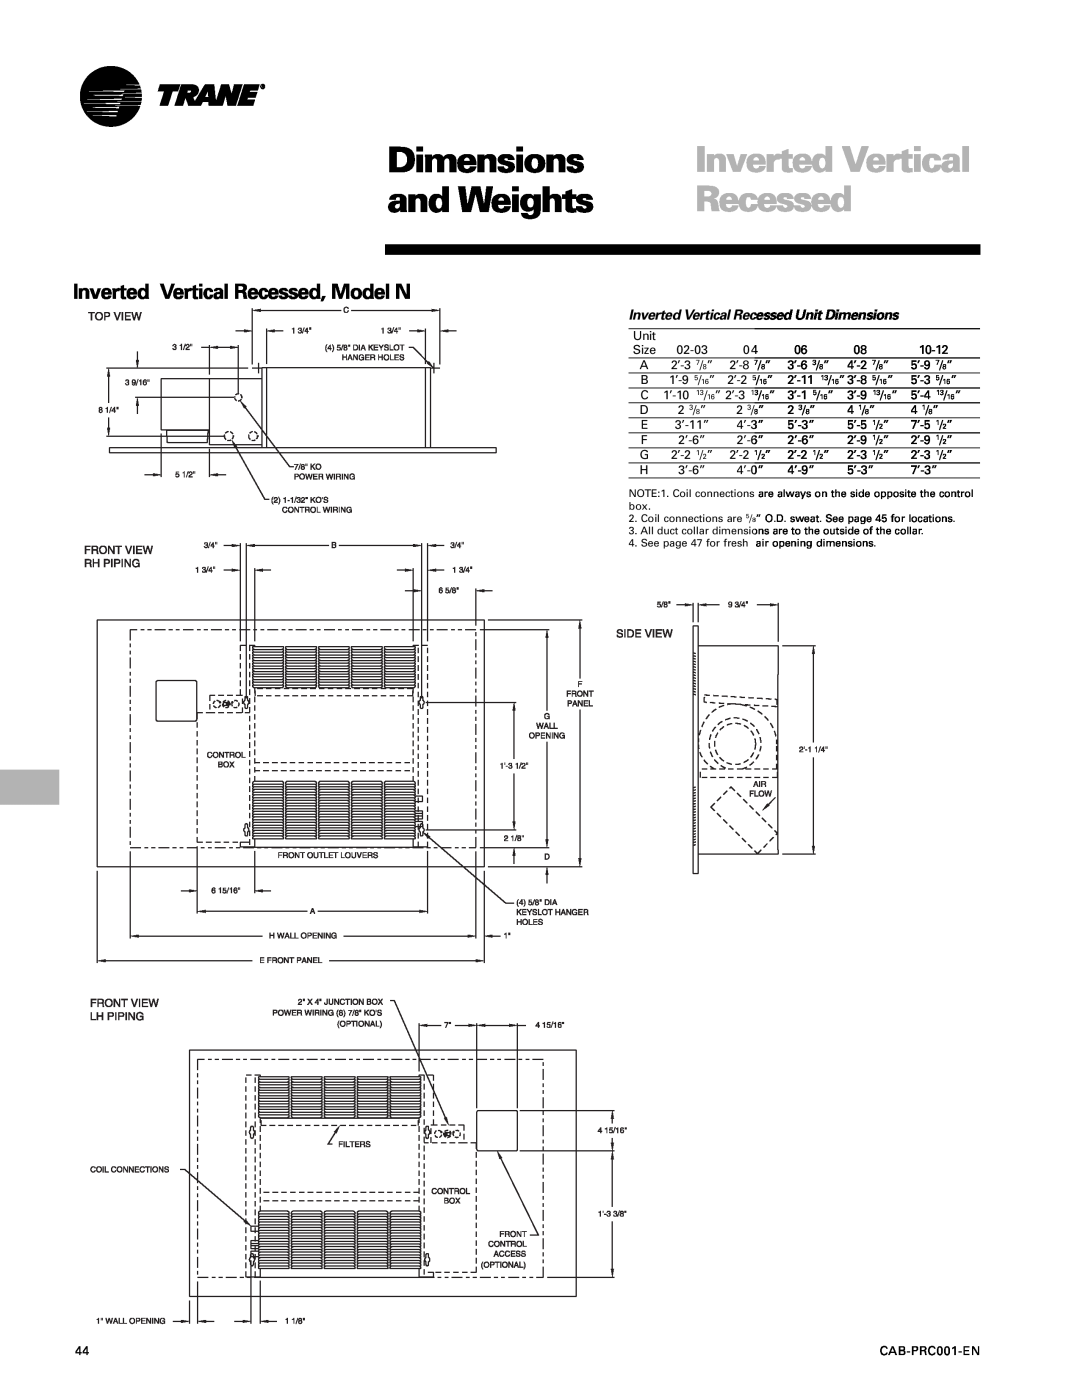 Trane CAB-PRC001-EN manual Dimensions, and Weights, Inverted Vertical Recessed, Model N 